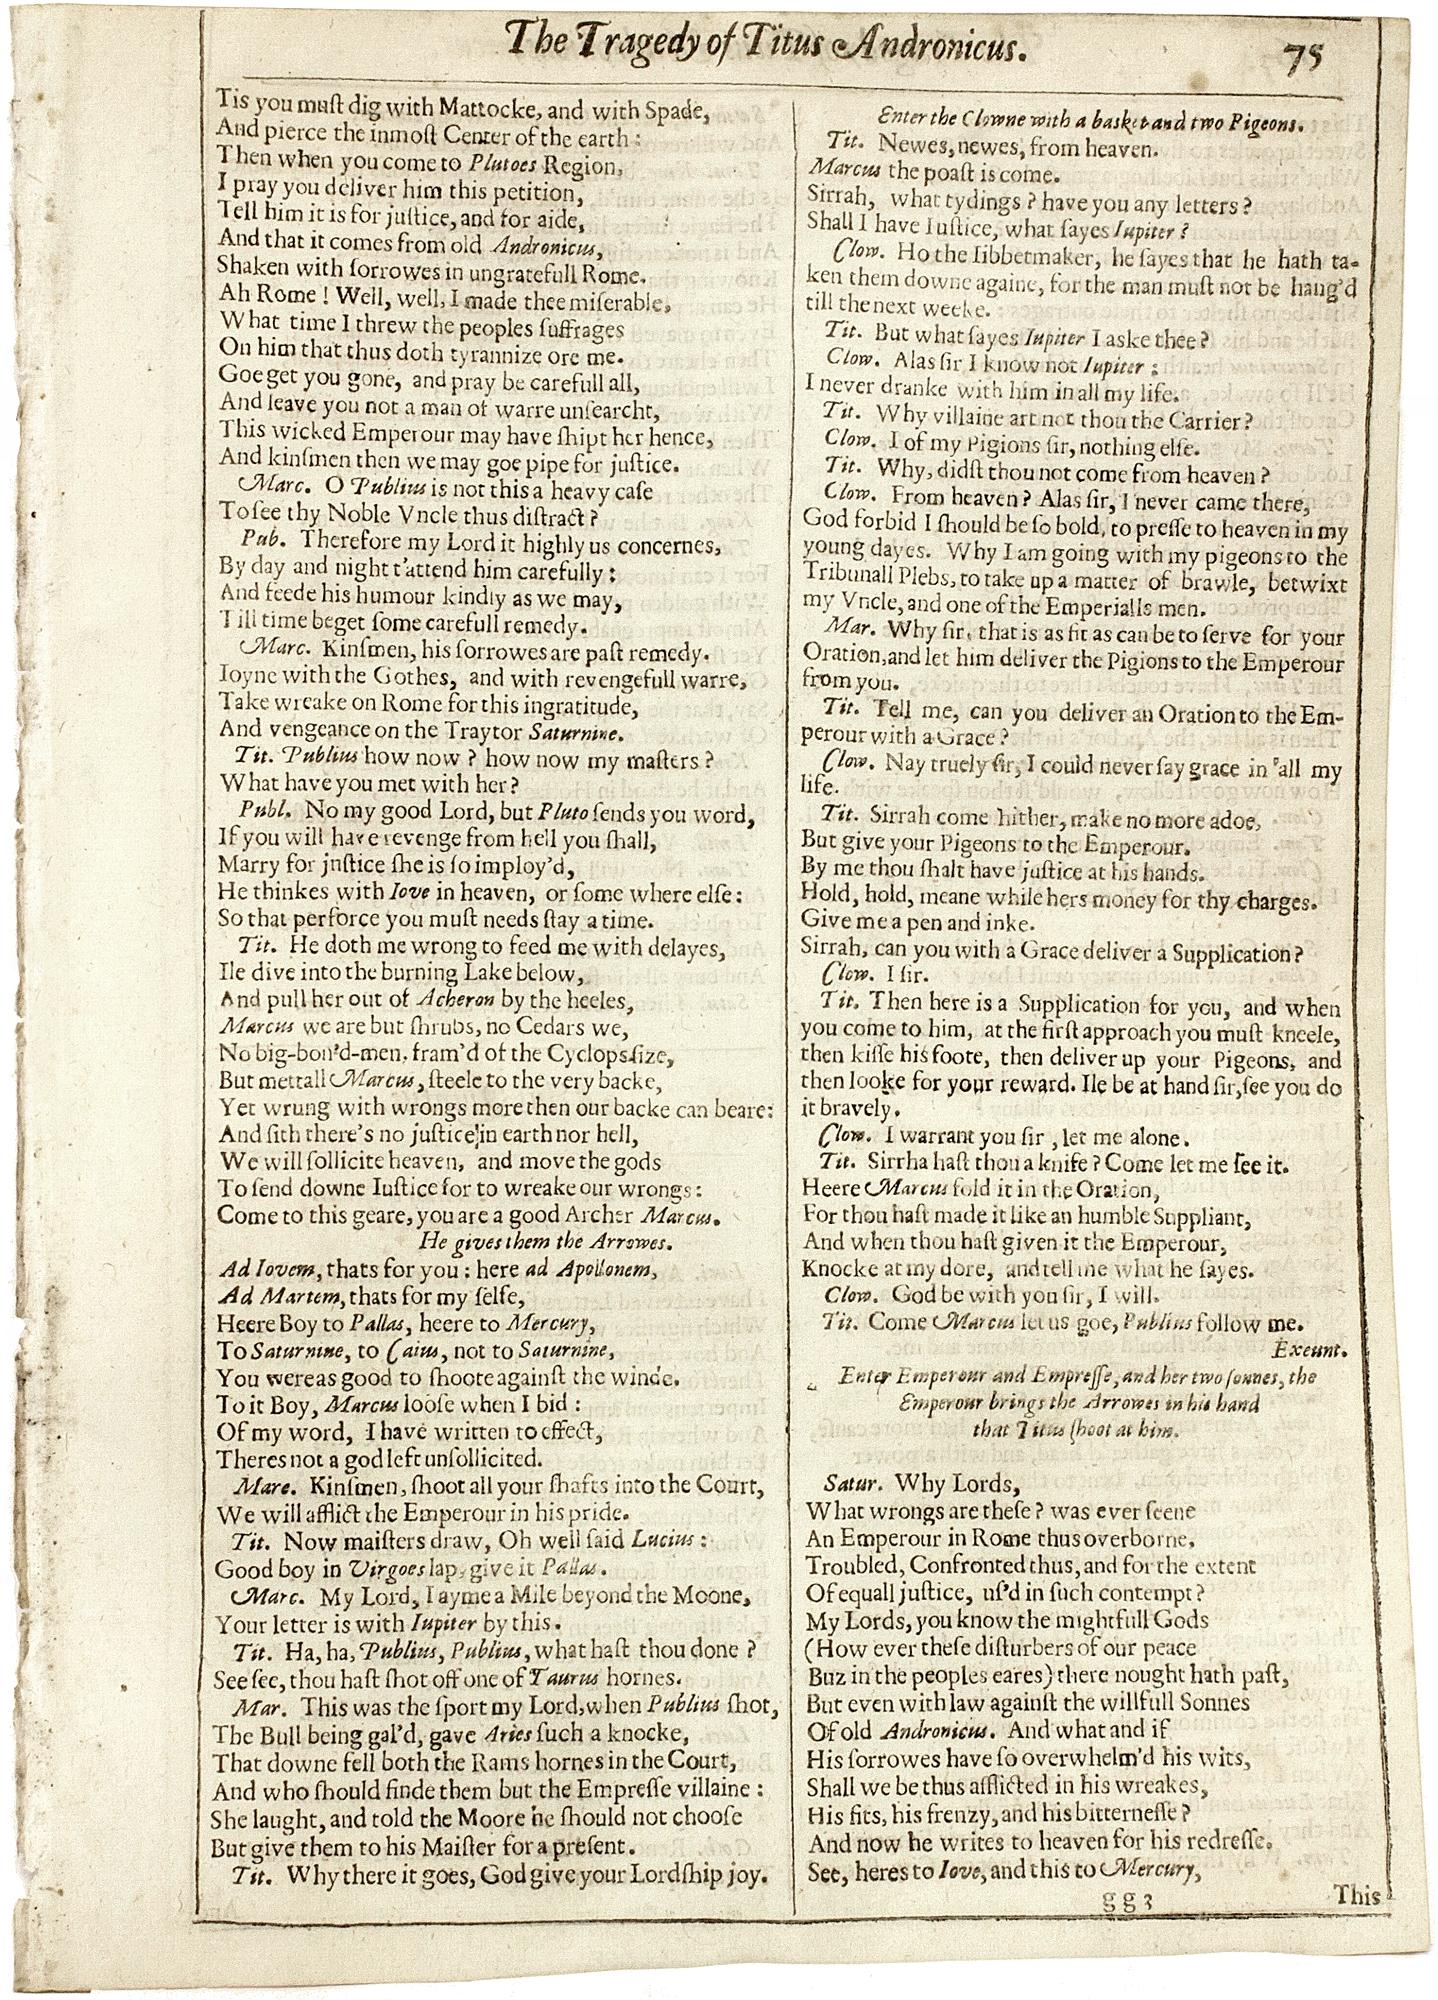 AUTHOR: SHAKESPEARE, William. 

TITLE: The Works of William Shakespeare. (The Tragedy of Titus Andronicus) - page 75-76.

PUBLISHER: London: Smethwick, J., Aspley, W., Hawkins, Richard, & Meighan, Richard, 1632.

DESCRIPTION: THE SECOND FOLIO.